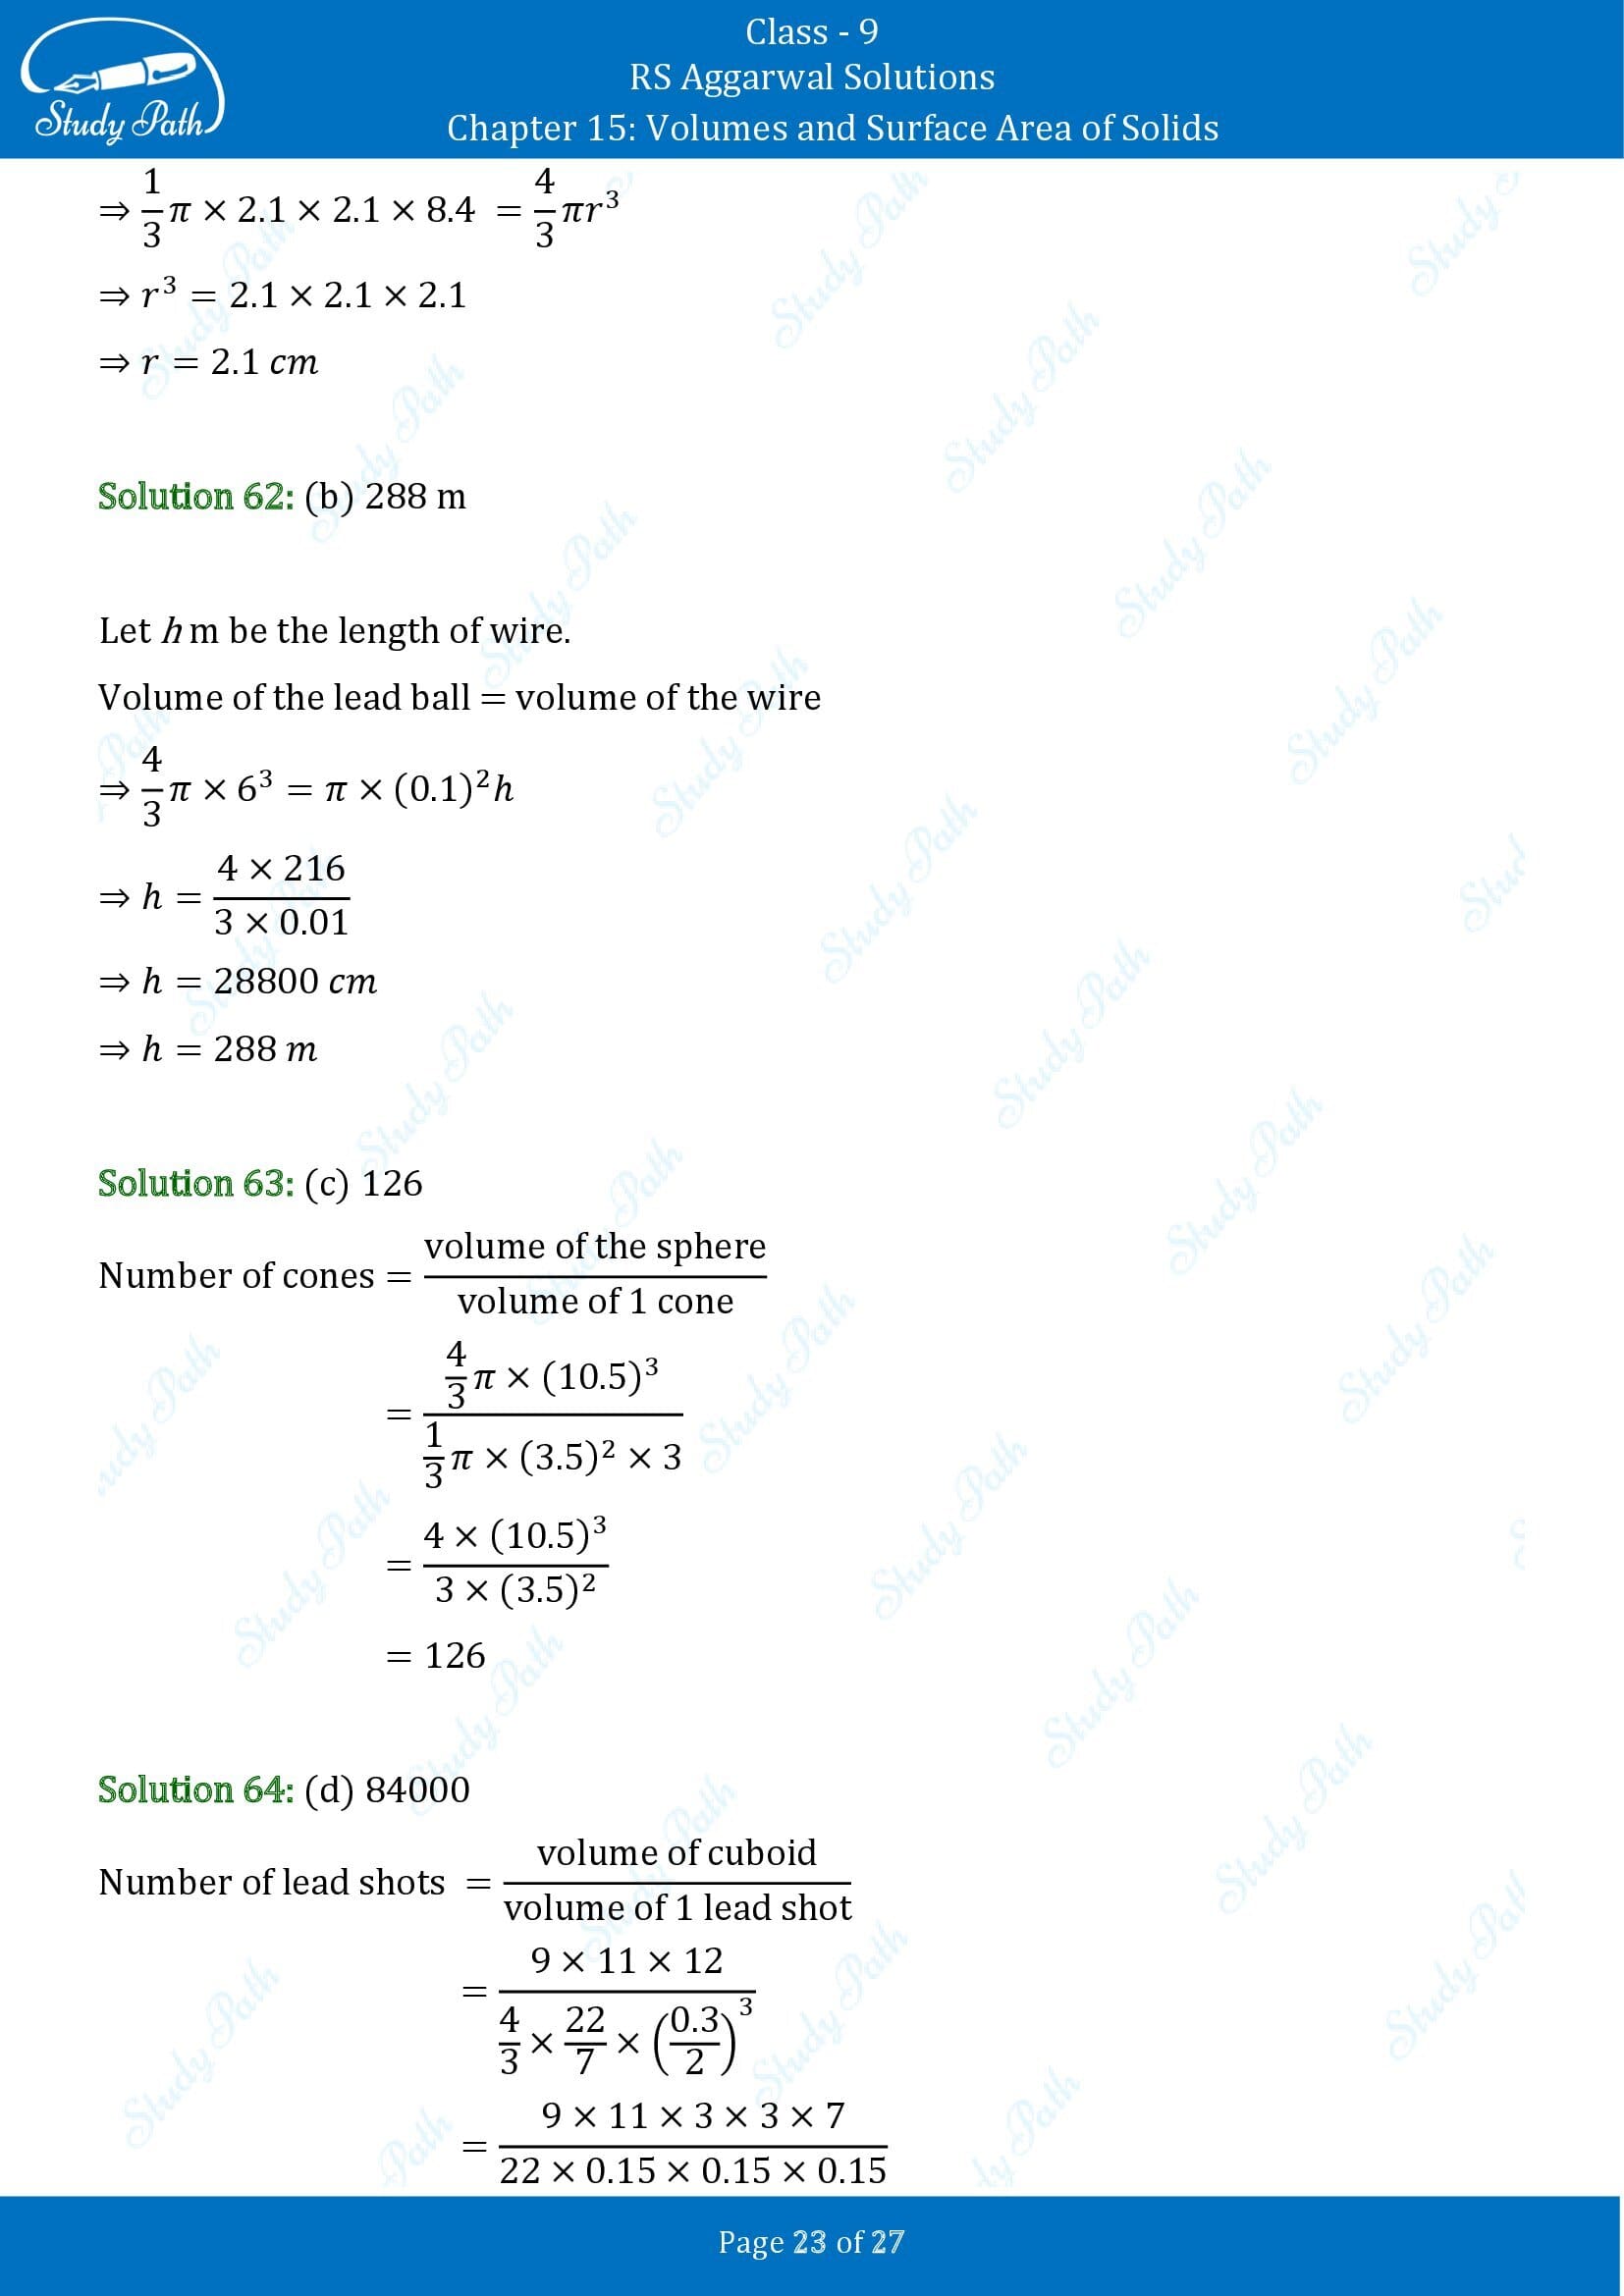 RS Aggarwal Solutions Class 9 Chapter 15 Volumes and Surface Area of Solids Multiple Choice Questions MCQs 00023